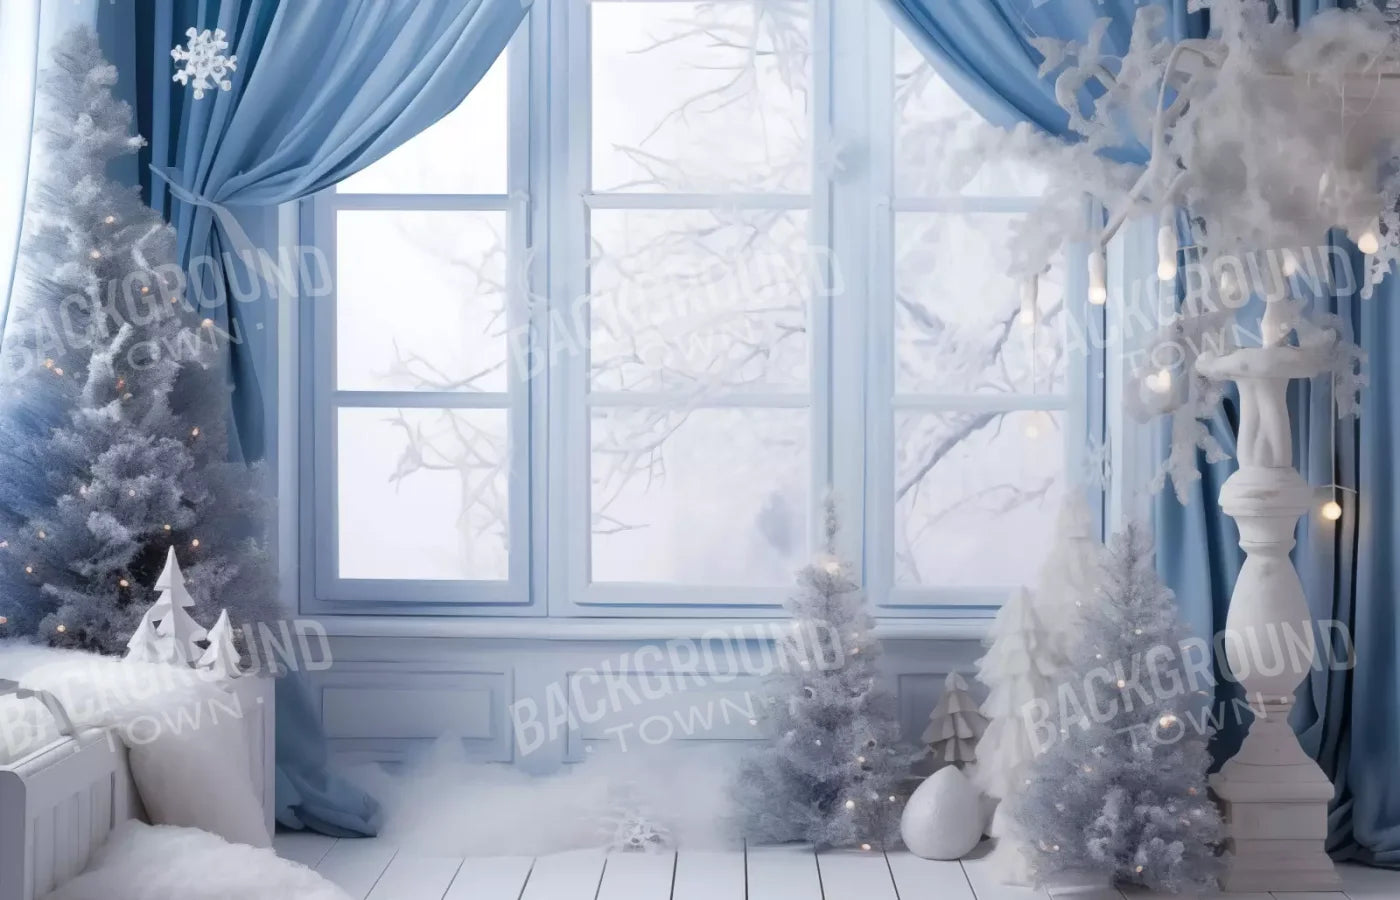 White And Blue Window 2 14X9 Ultracloth ( 168 X 108 Inch ) Backdrop